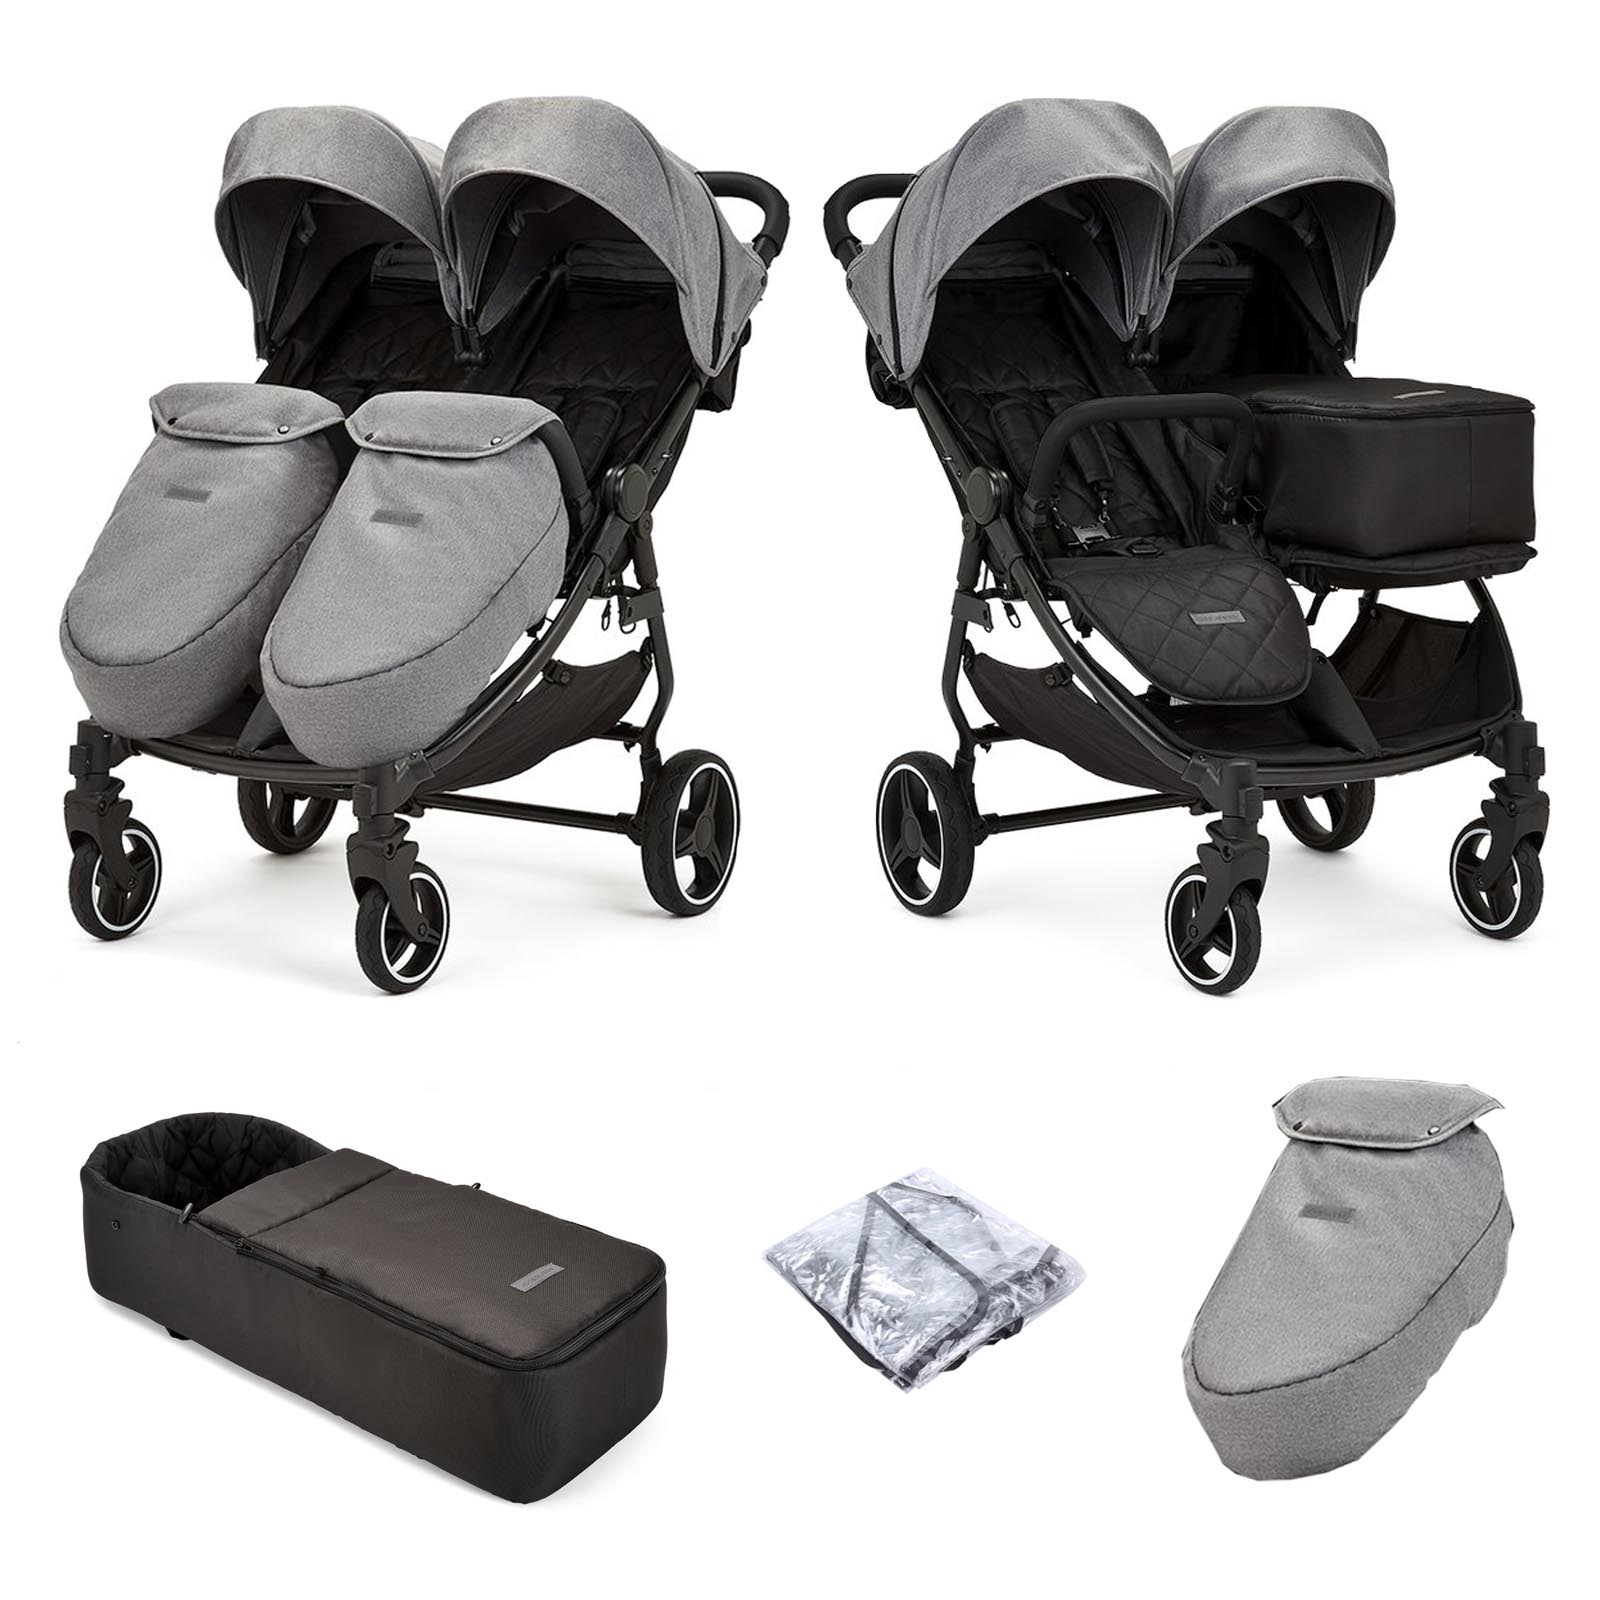 Ickle Bubba Venus Prime Double Pushchair Stroller with Cocoon and Raincover - Grey